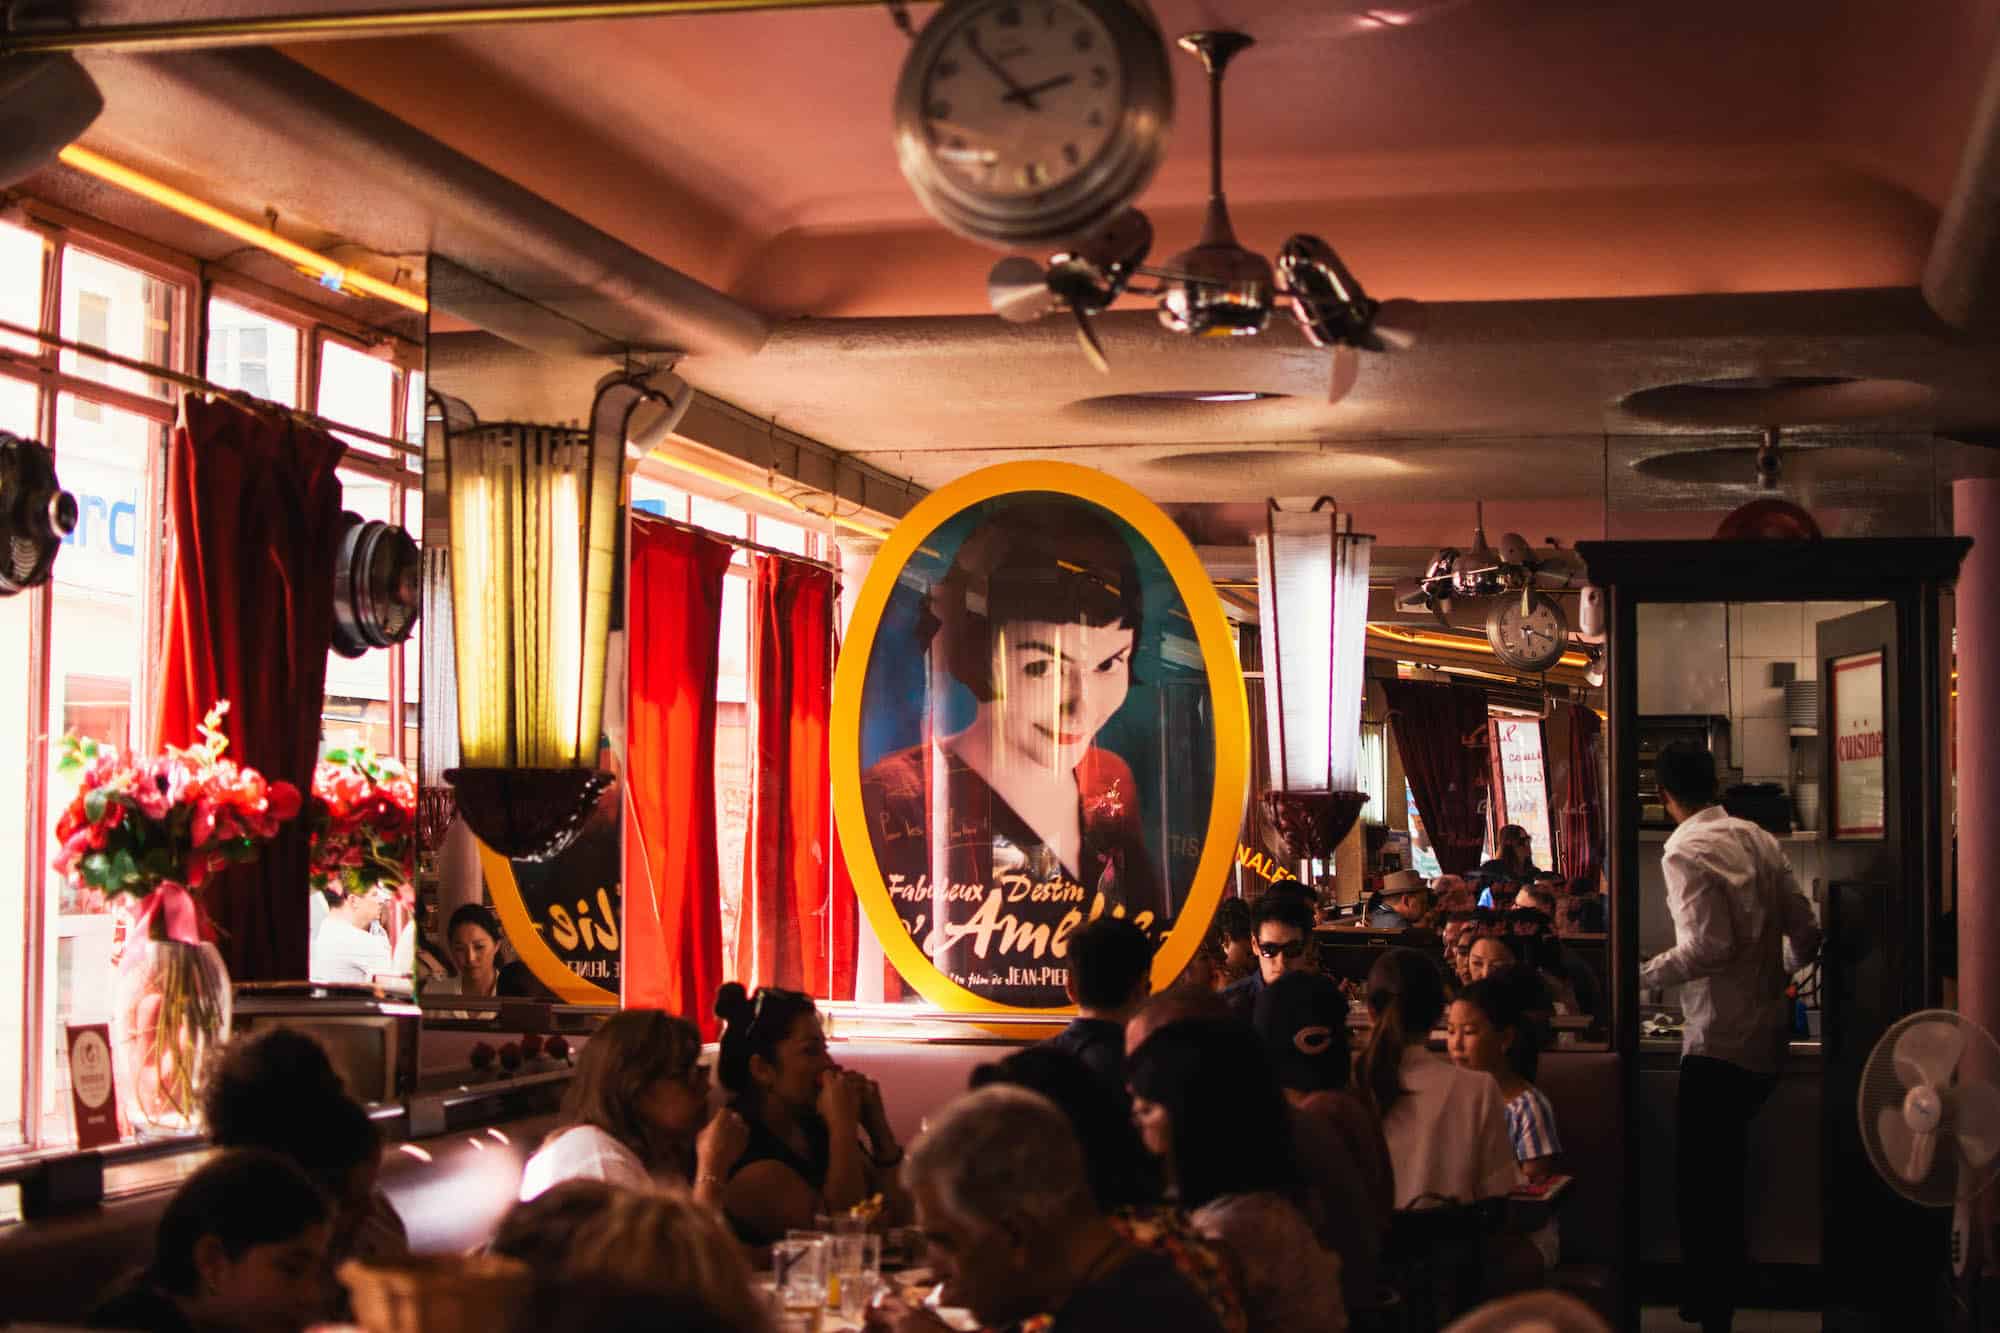 Inside the Café des 2 Moulins, otherwise known as the café in the movie "Amélie", with an image of Amélie printed on a glass pane and people sat in booths.